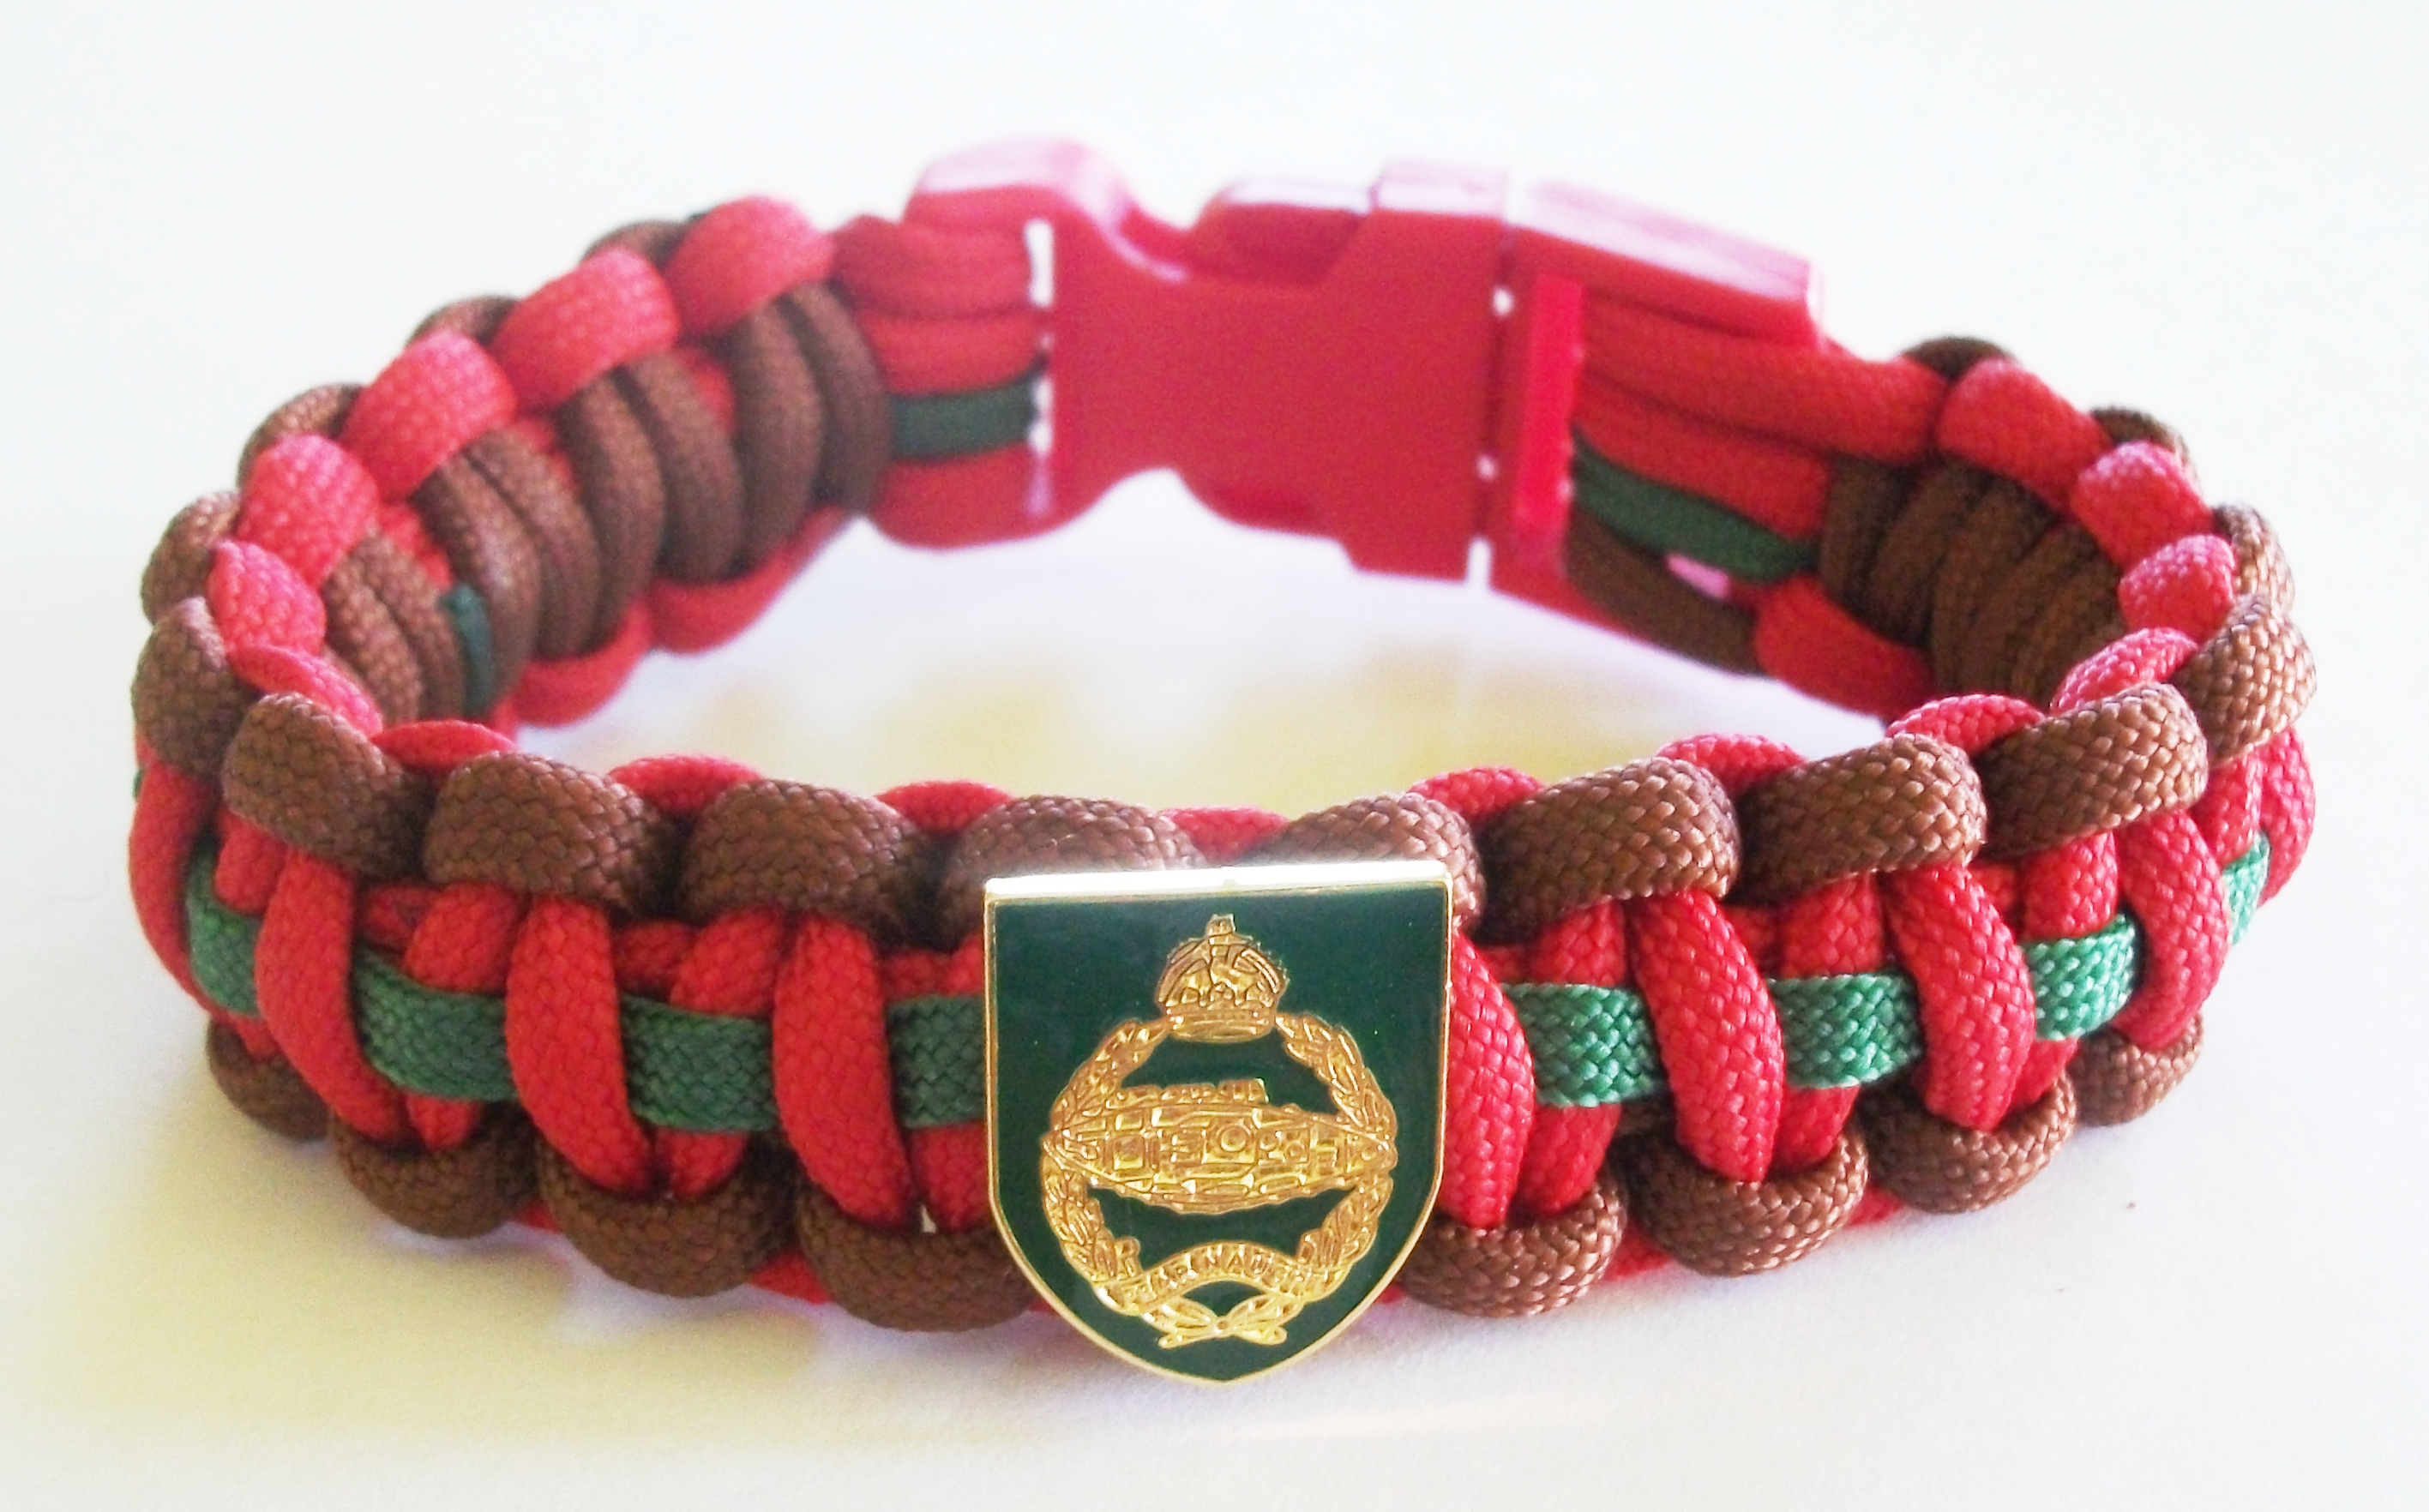 ROYAL TANK REGIMENT PARACORD WRISTBAND WITH BADGES 